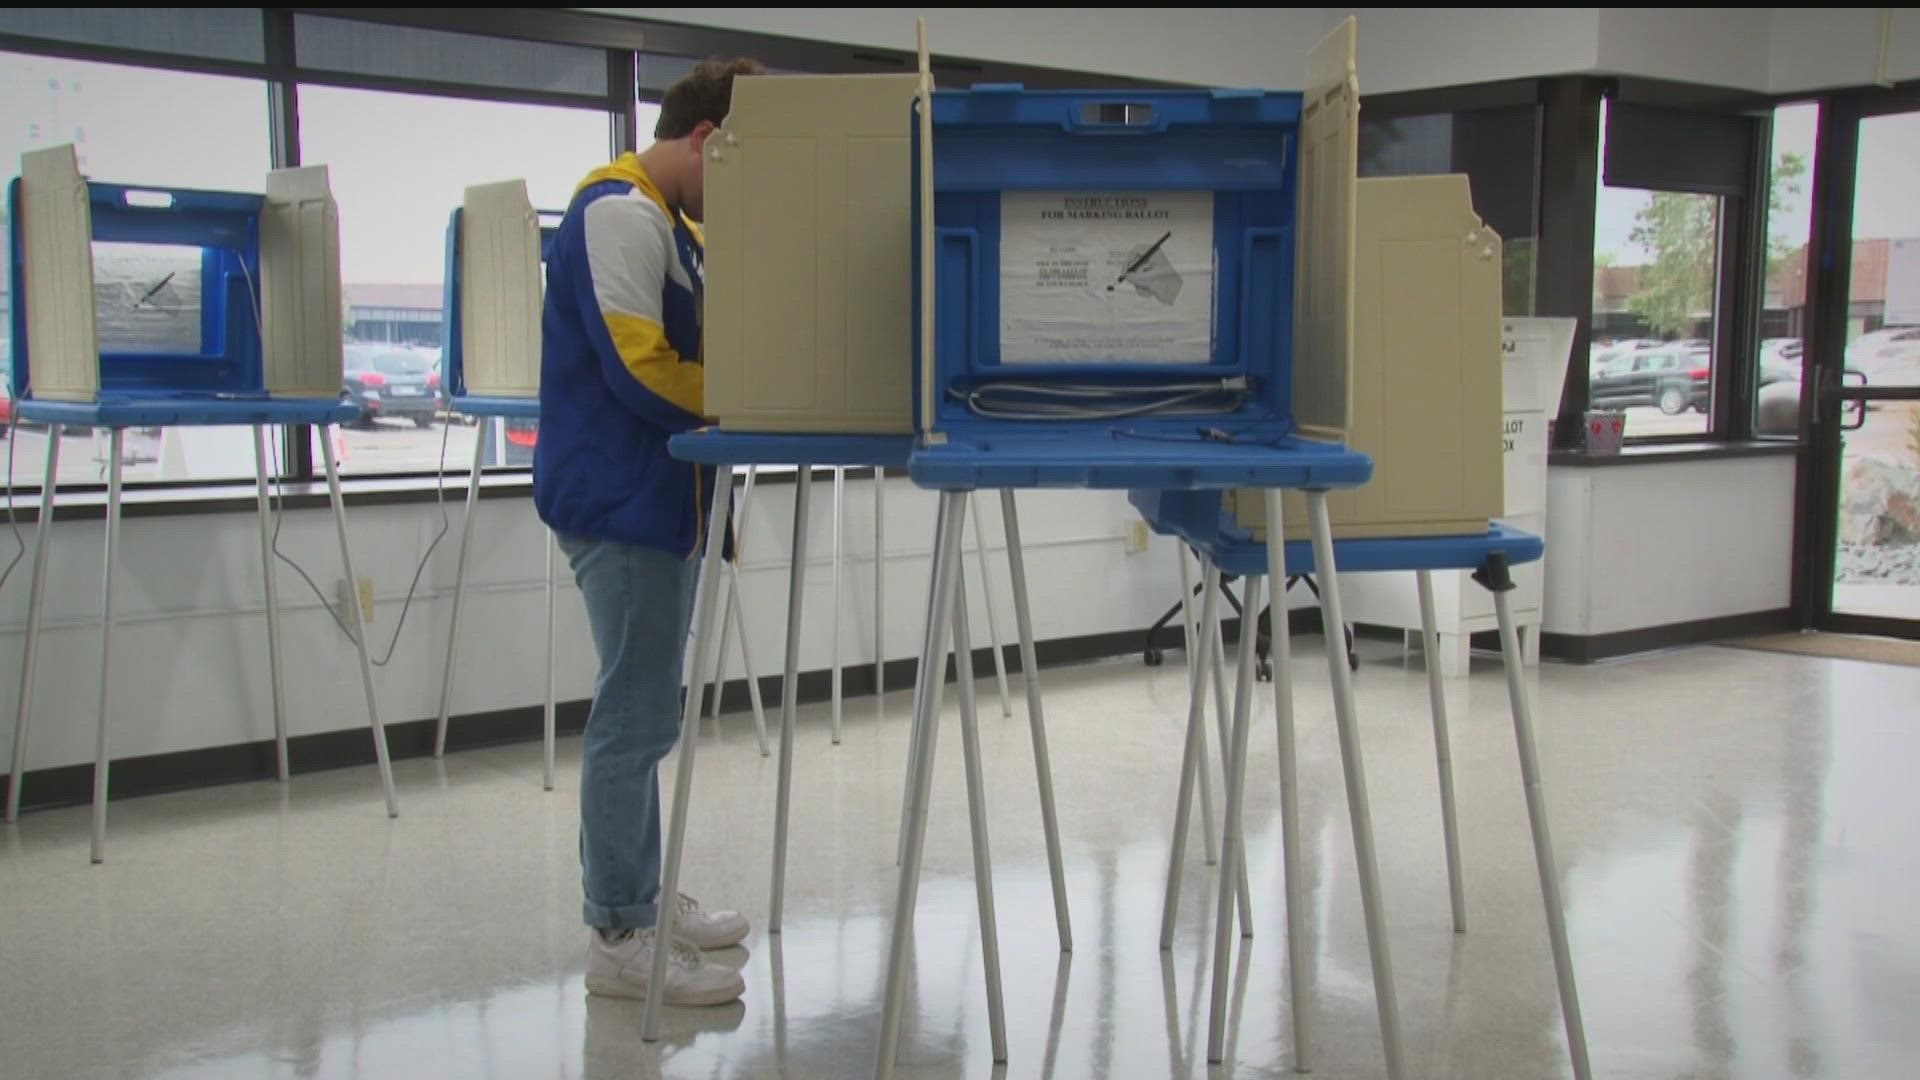 With just four weeks to spare before the midterms, Secretary of State Steve Simon says early voting this year is proving to be no exception.